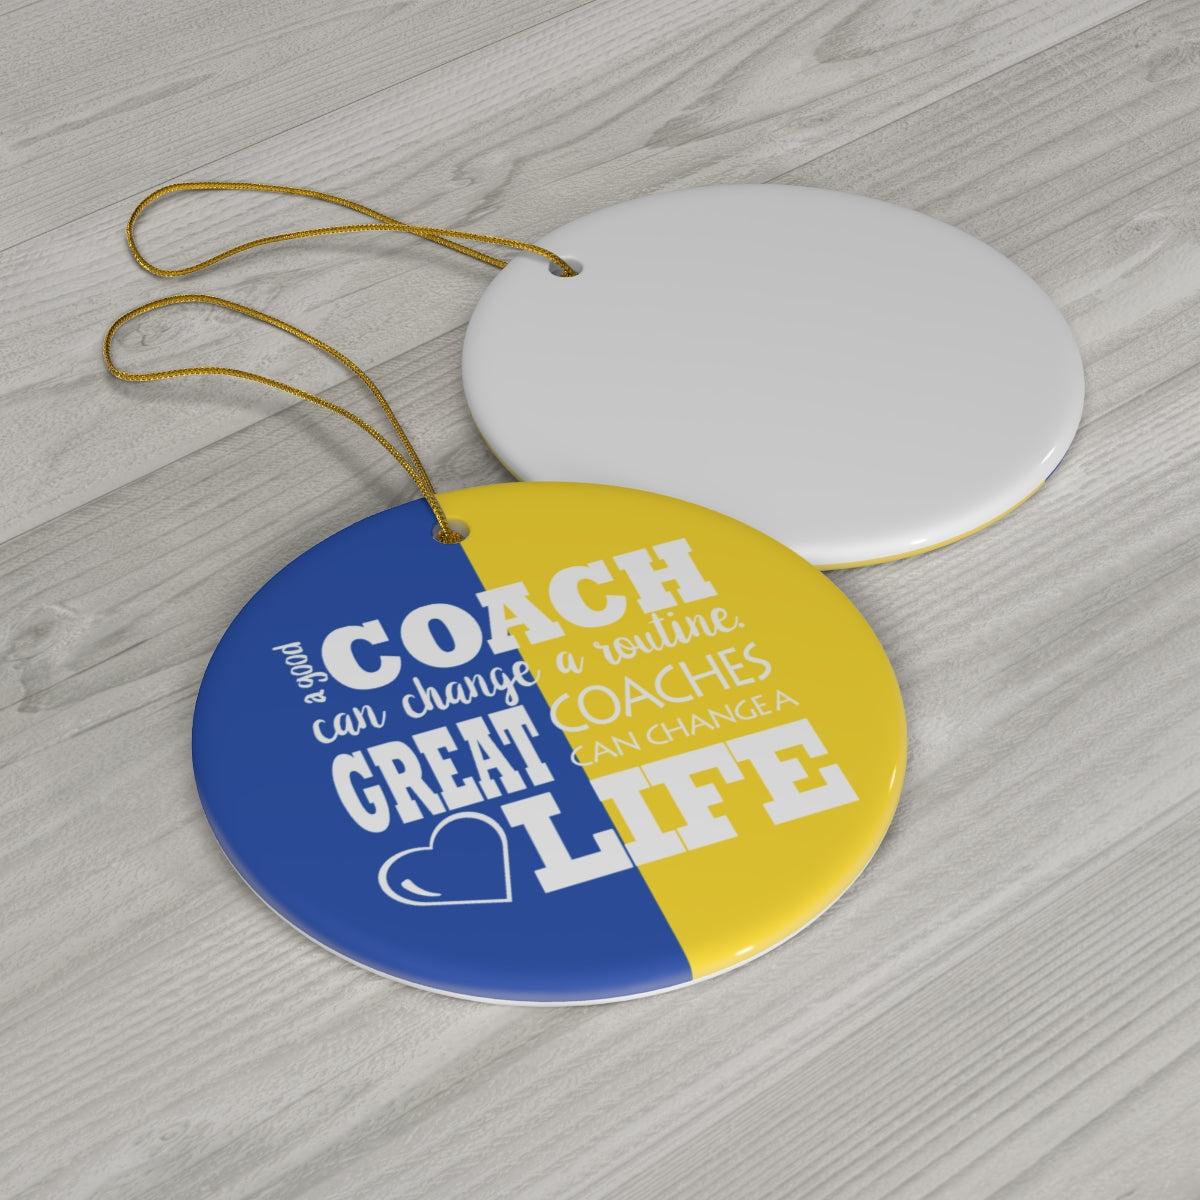 Coach Ornament, Personalized Coach Christmas Ornament, Funny Custom Ceramic Tree Ornament Gift for Our Great Coaches, Christmas Present